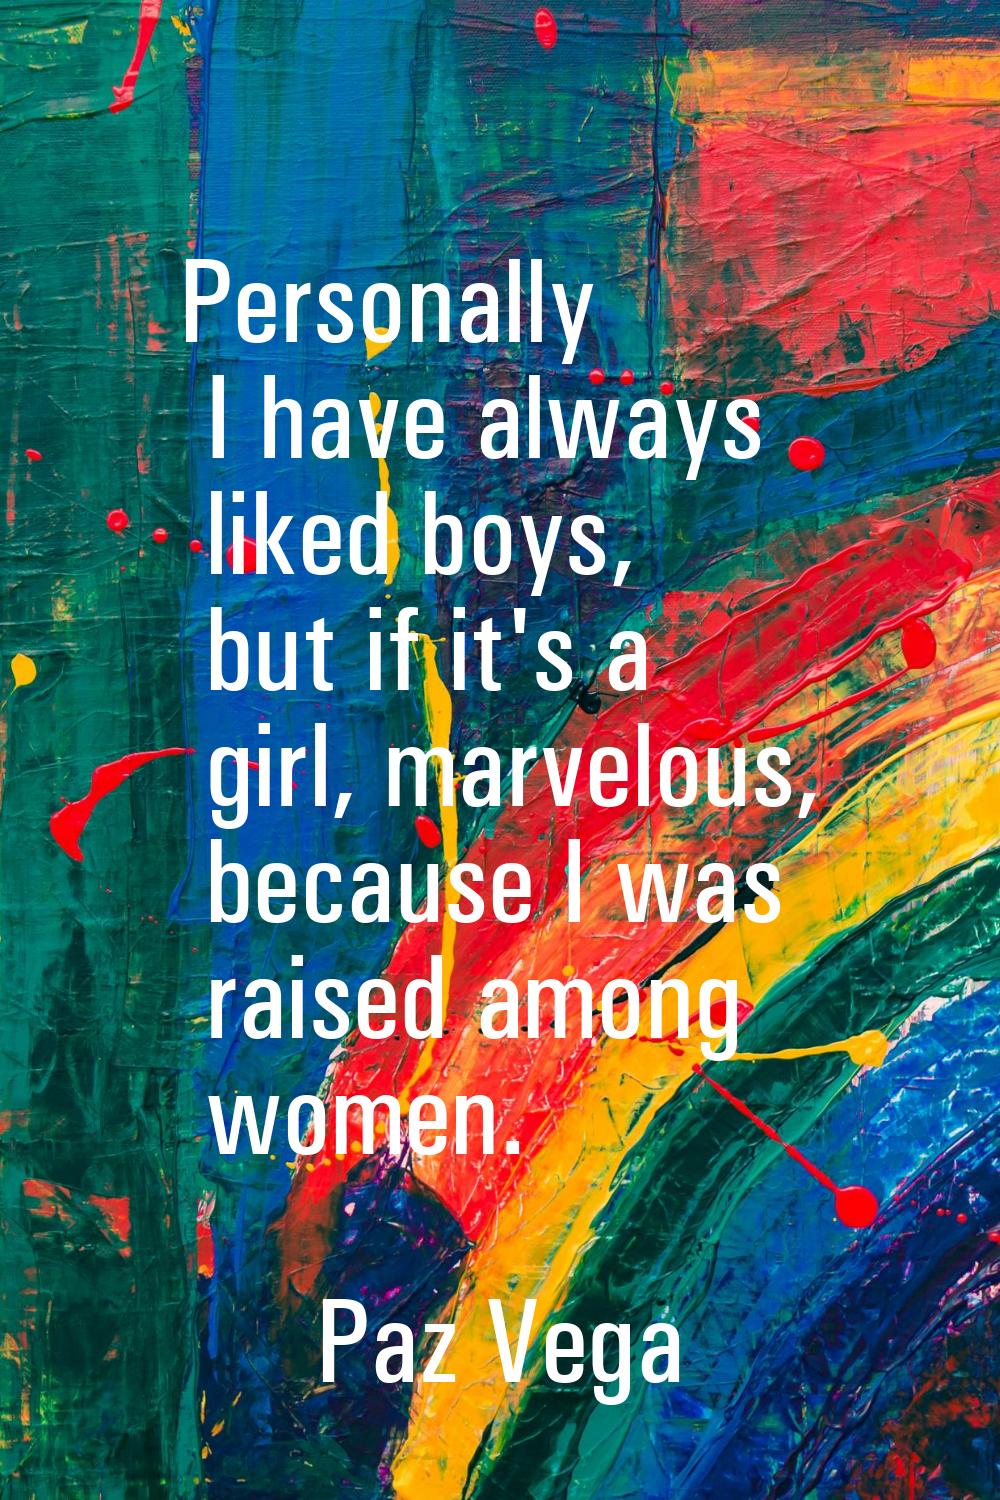 Personally I have always liked boys, but if it's a girl, marvelous, because I was raised among wome